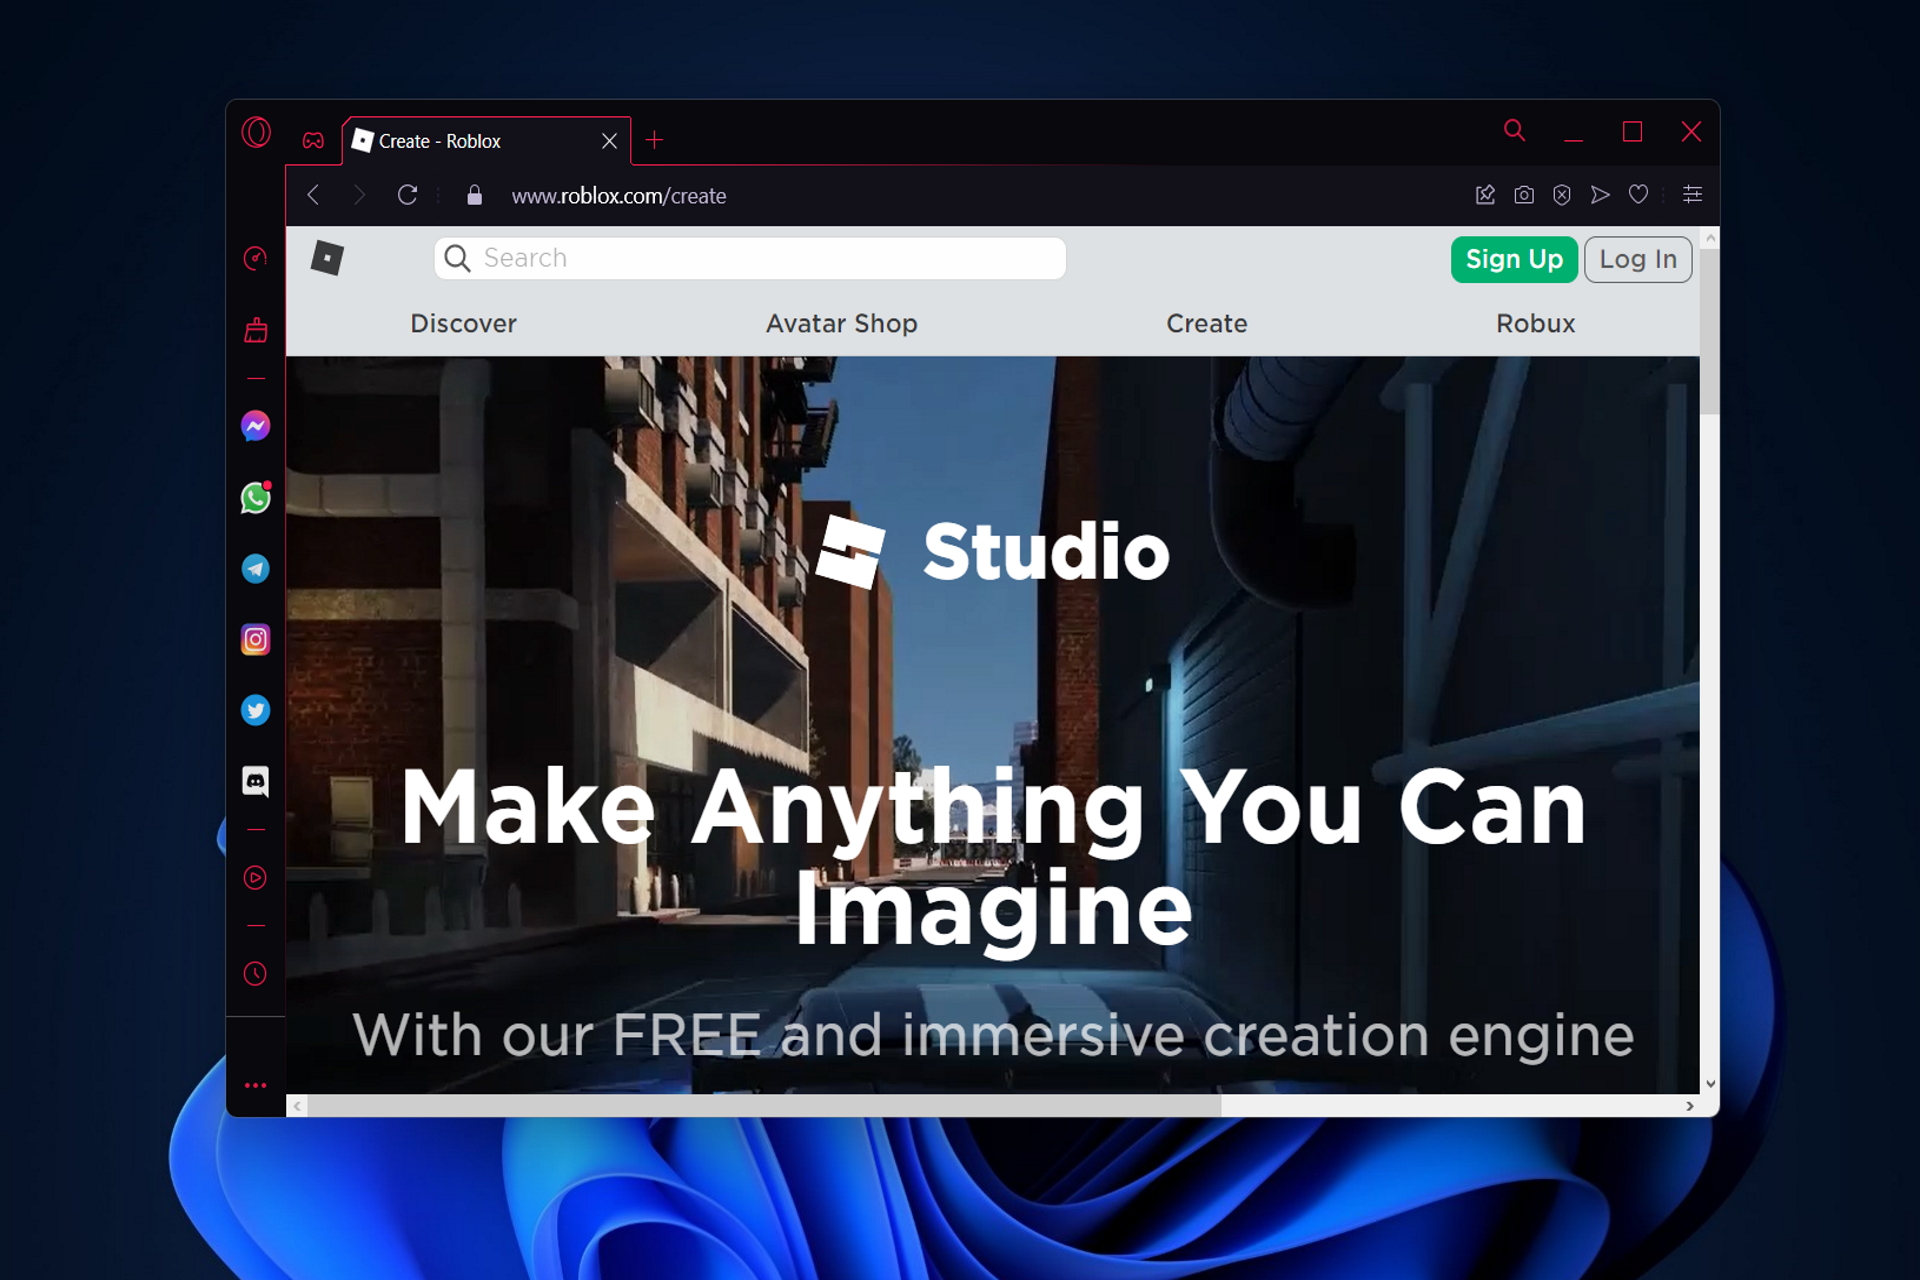 opera-gx-roblox roblox studio browser not supported